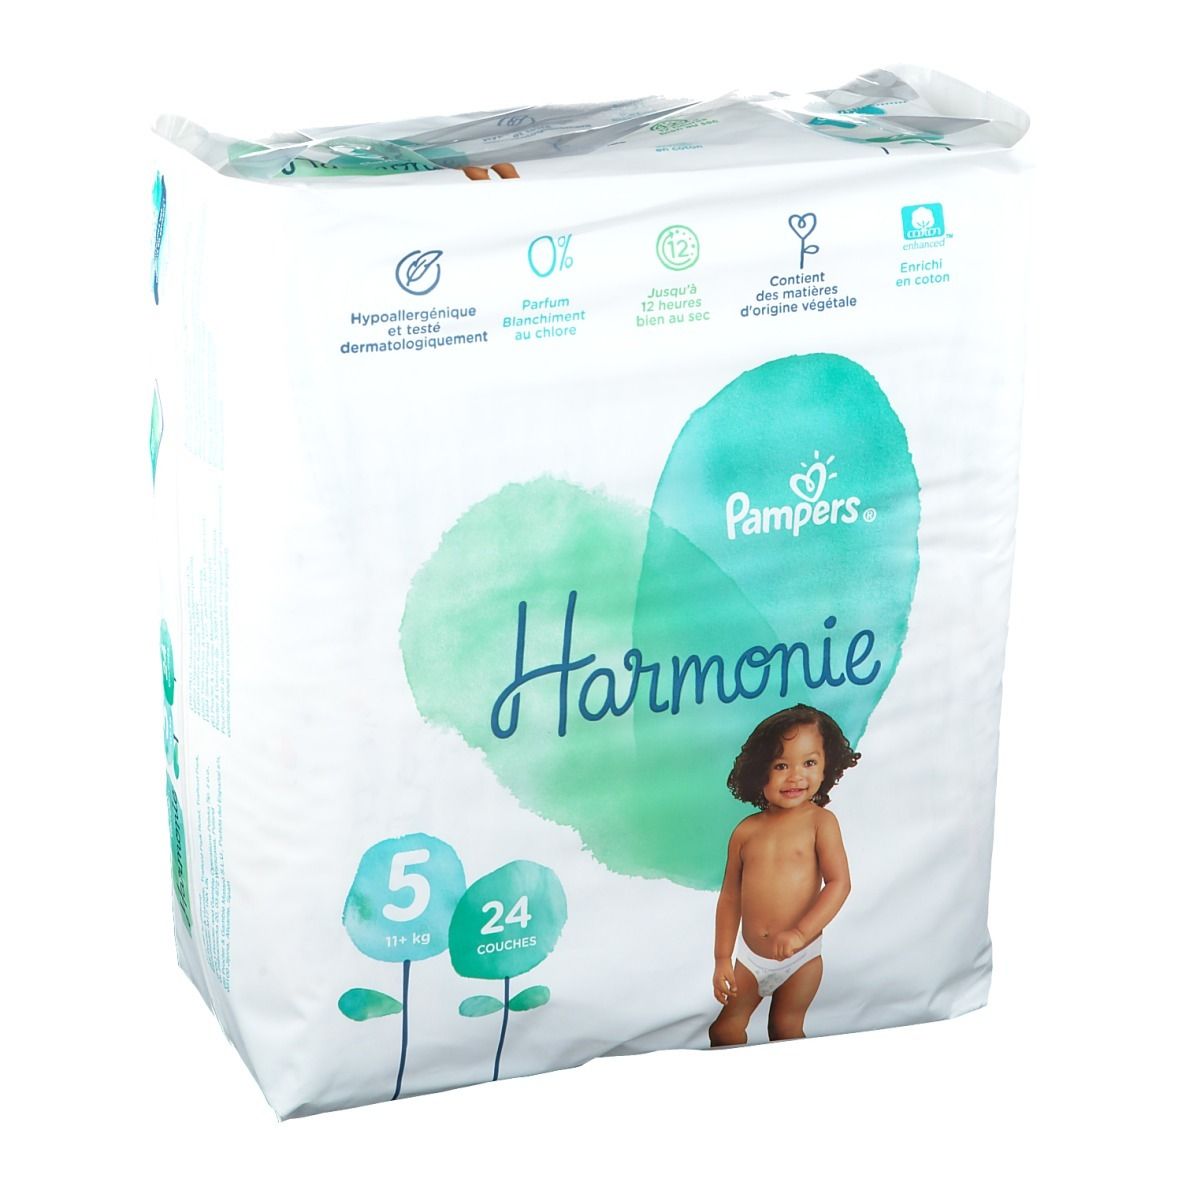 Pampers® Harmonie Couches Taille 5, +11 kg